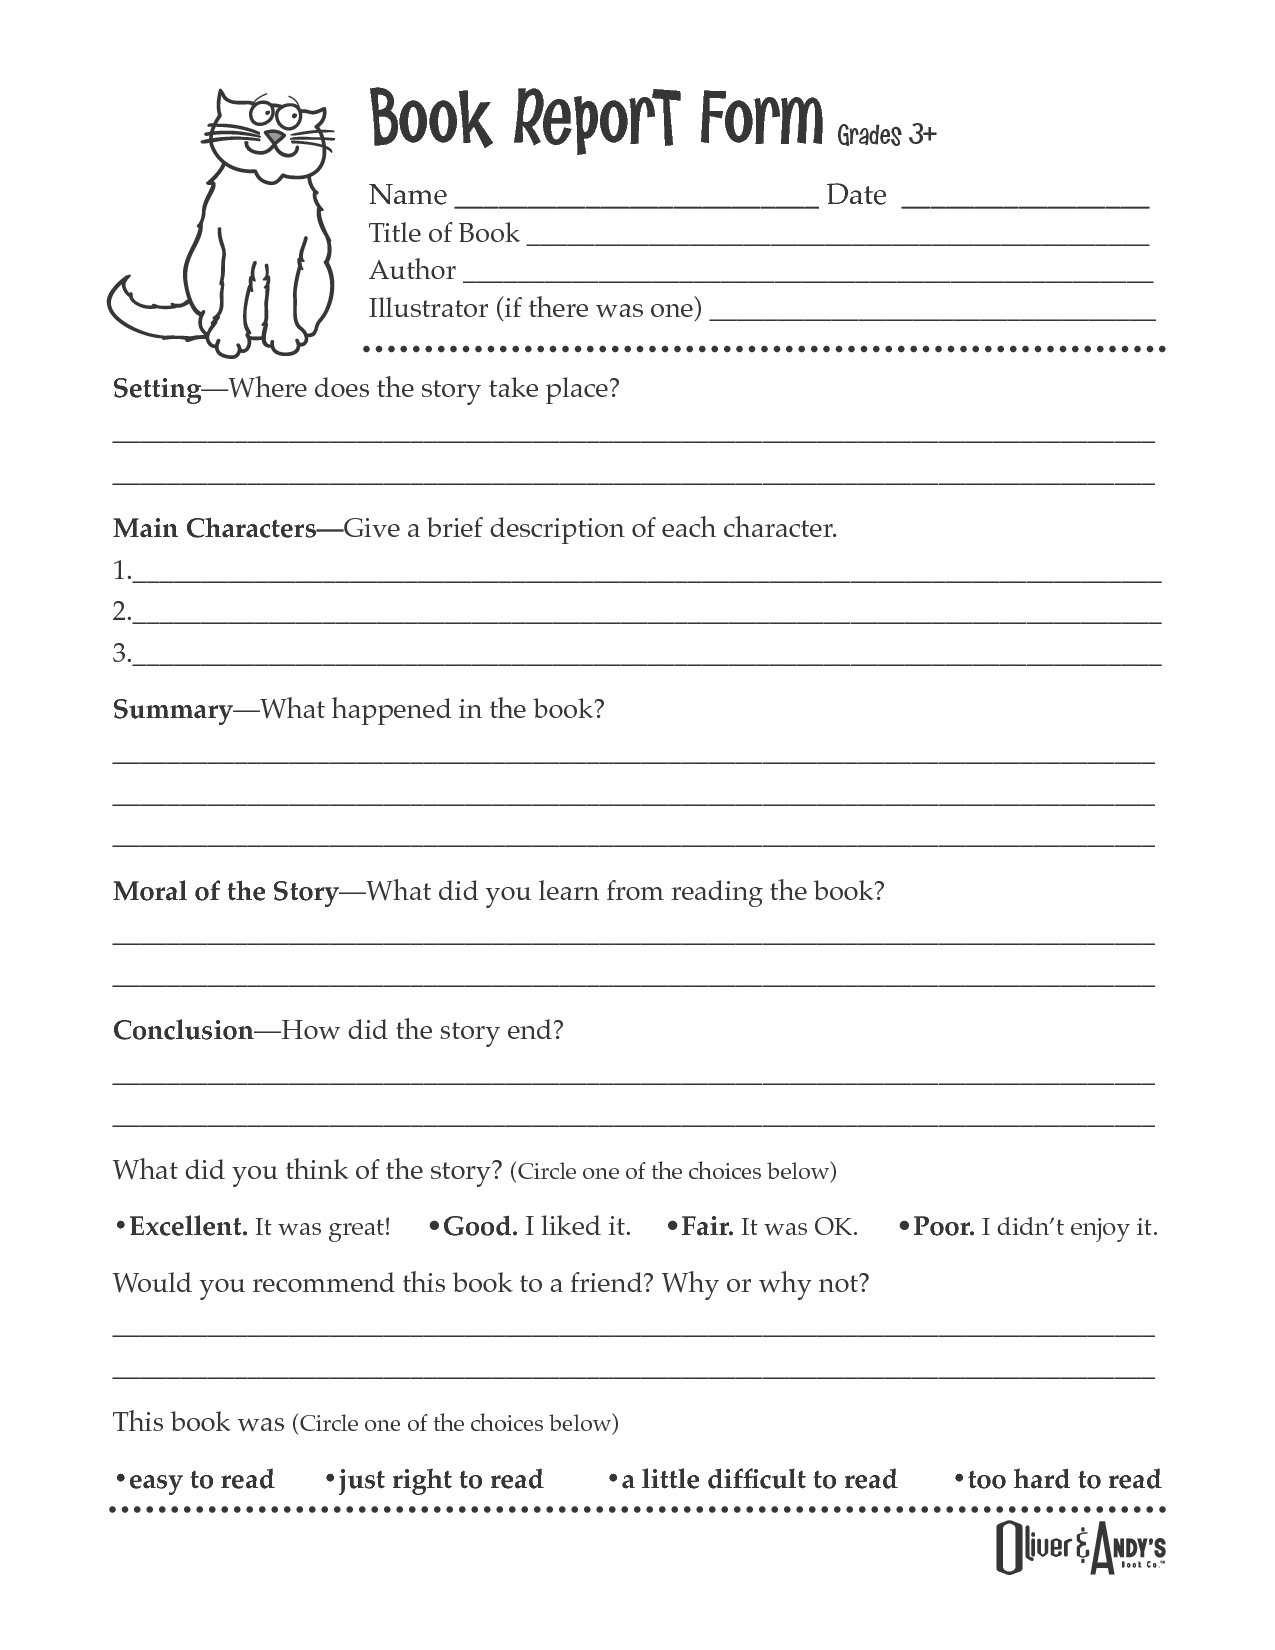 10 Famous Ideas For Books To Write second grade book report template book report form grades 3 2 2022